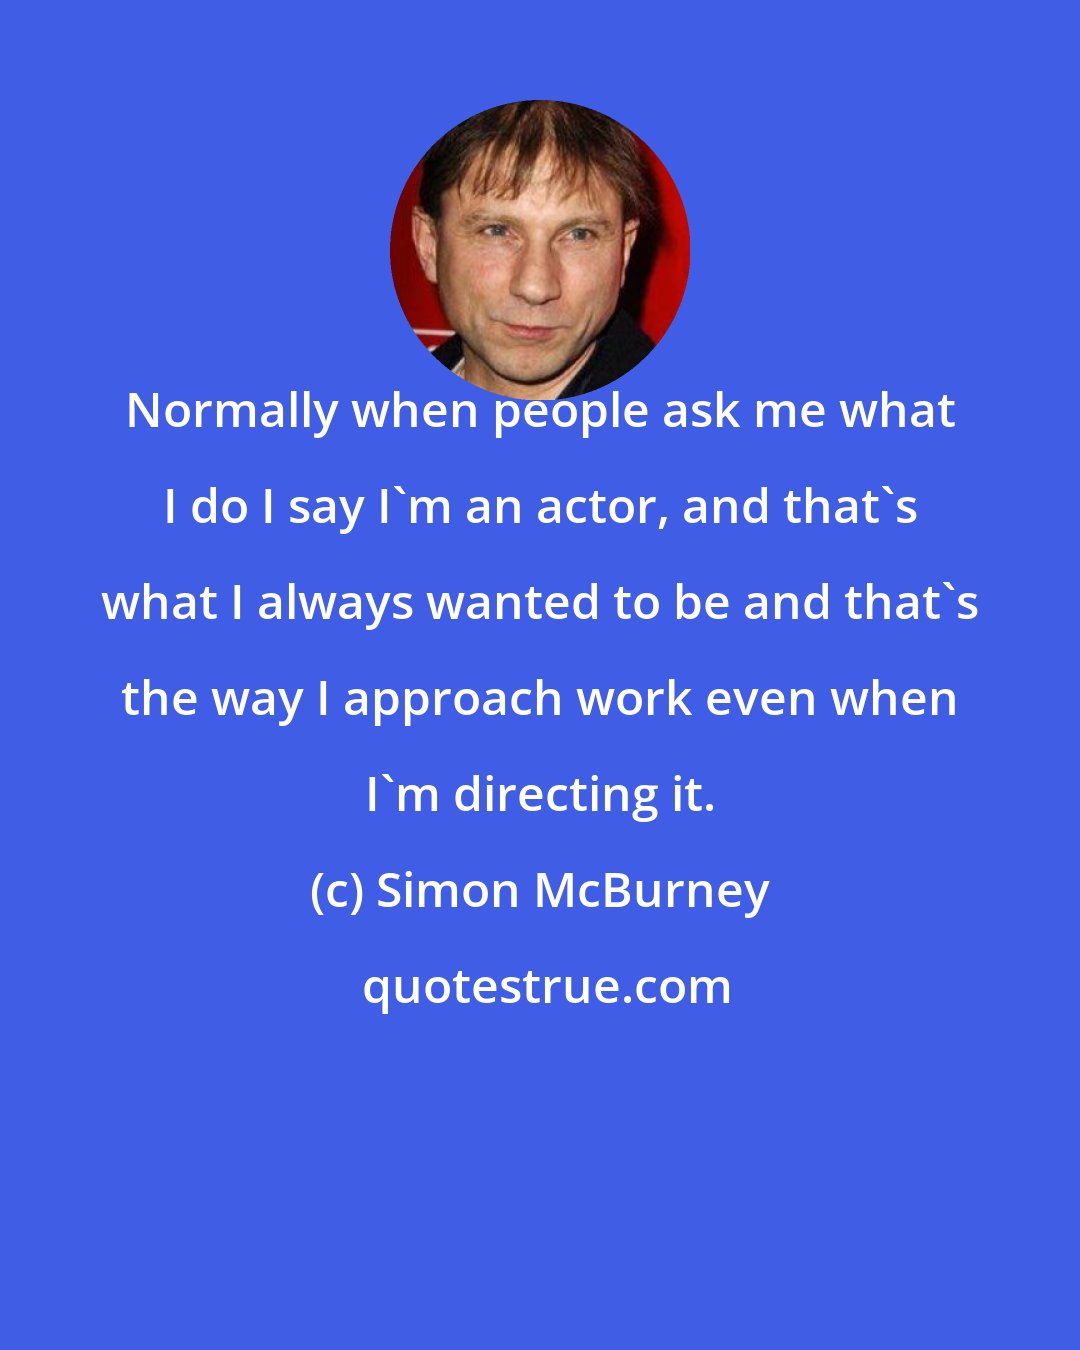 Simon McBurney: Normally when people ask me what I do I say I'm an actor, and that's what I always wanted to be and that's the way I approach work even when I'm directing it.